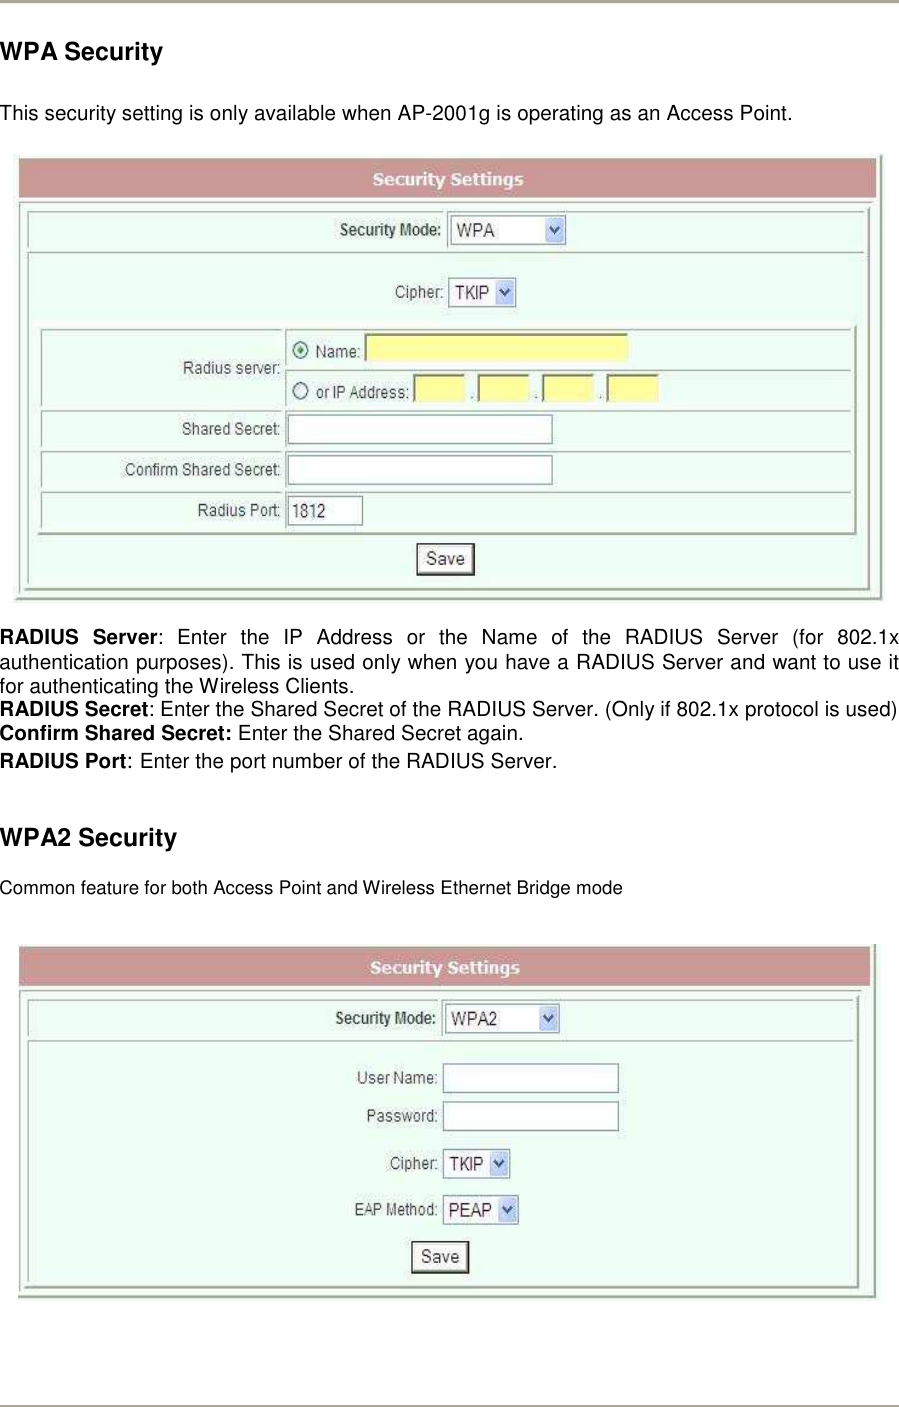        WPA Security  This security setting is only available when AP-2001g is operating as an Access Point.    RADIUS  Server:  Enter  the  IP  Address  or  the  Name  of  the  RADIUS  Server  (for  802.1x authentication purposes). This is used only when you have a RADIUS Server and want to use it for authenticating the Wireless Clients.  RADIUS Secret: Enter the Shared Secret of the RADIUS Server. (Only if 802.1x protocol is used) Confirm Shared Secret: Enter the Shared Secret again. RADIUS Port: Enter the port number of the RADIUS Server.  WPA2 Security Common feature for both Access Point and Wireless Ethernet Bridge mode    